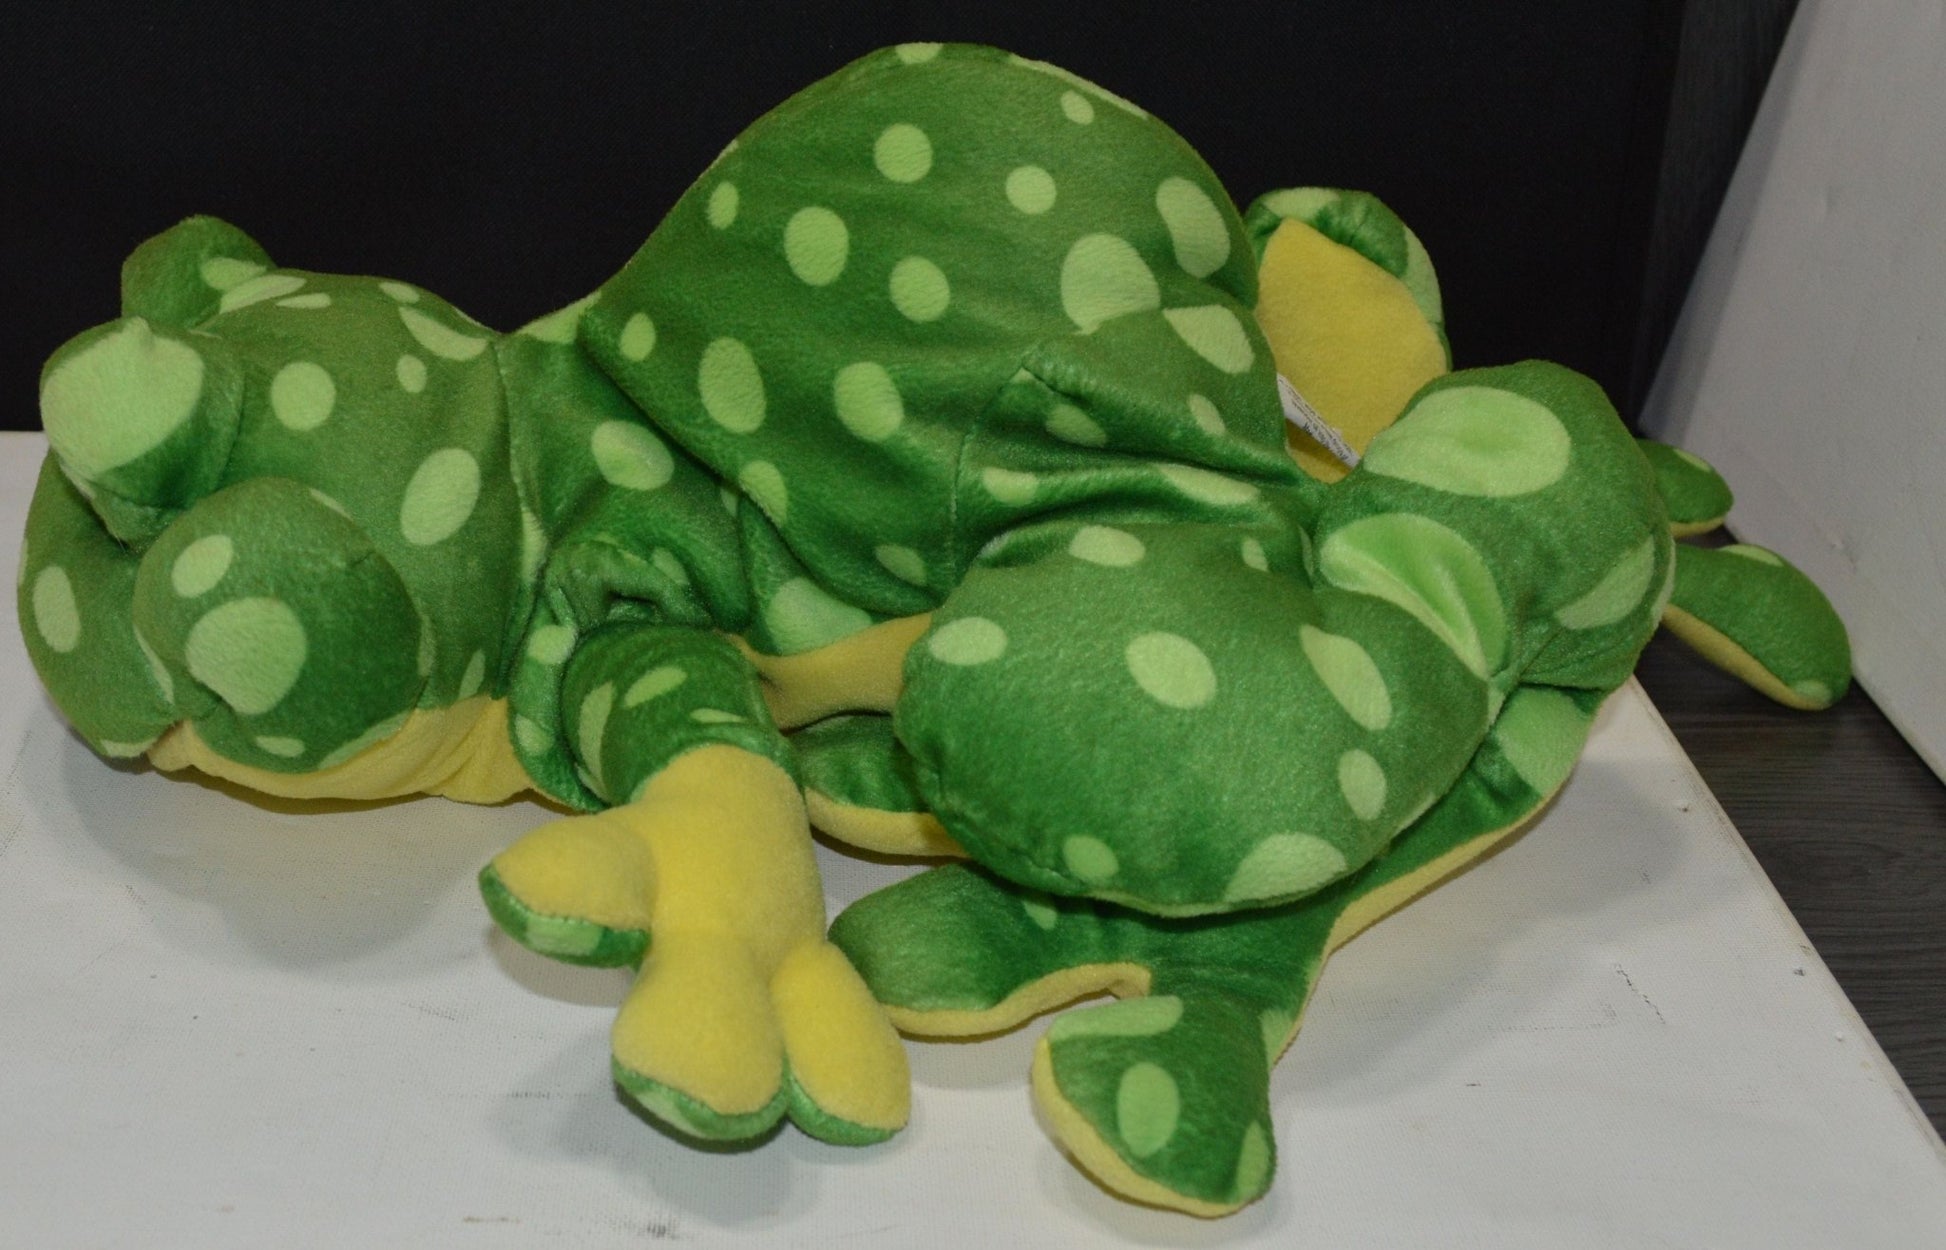 SOFT TOY GREEN FROG(PREVIOUSLY OWNED) GOOD CONDITION - TMD167207